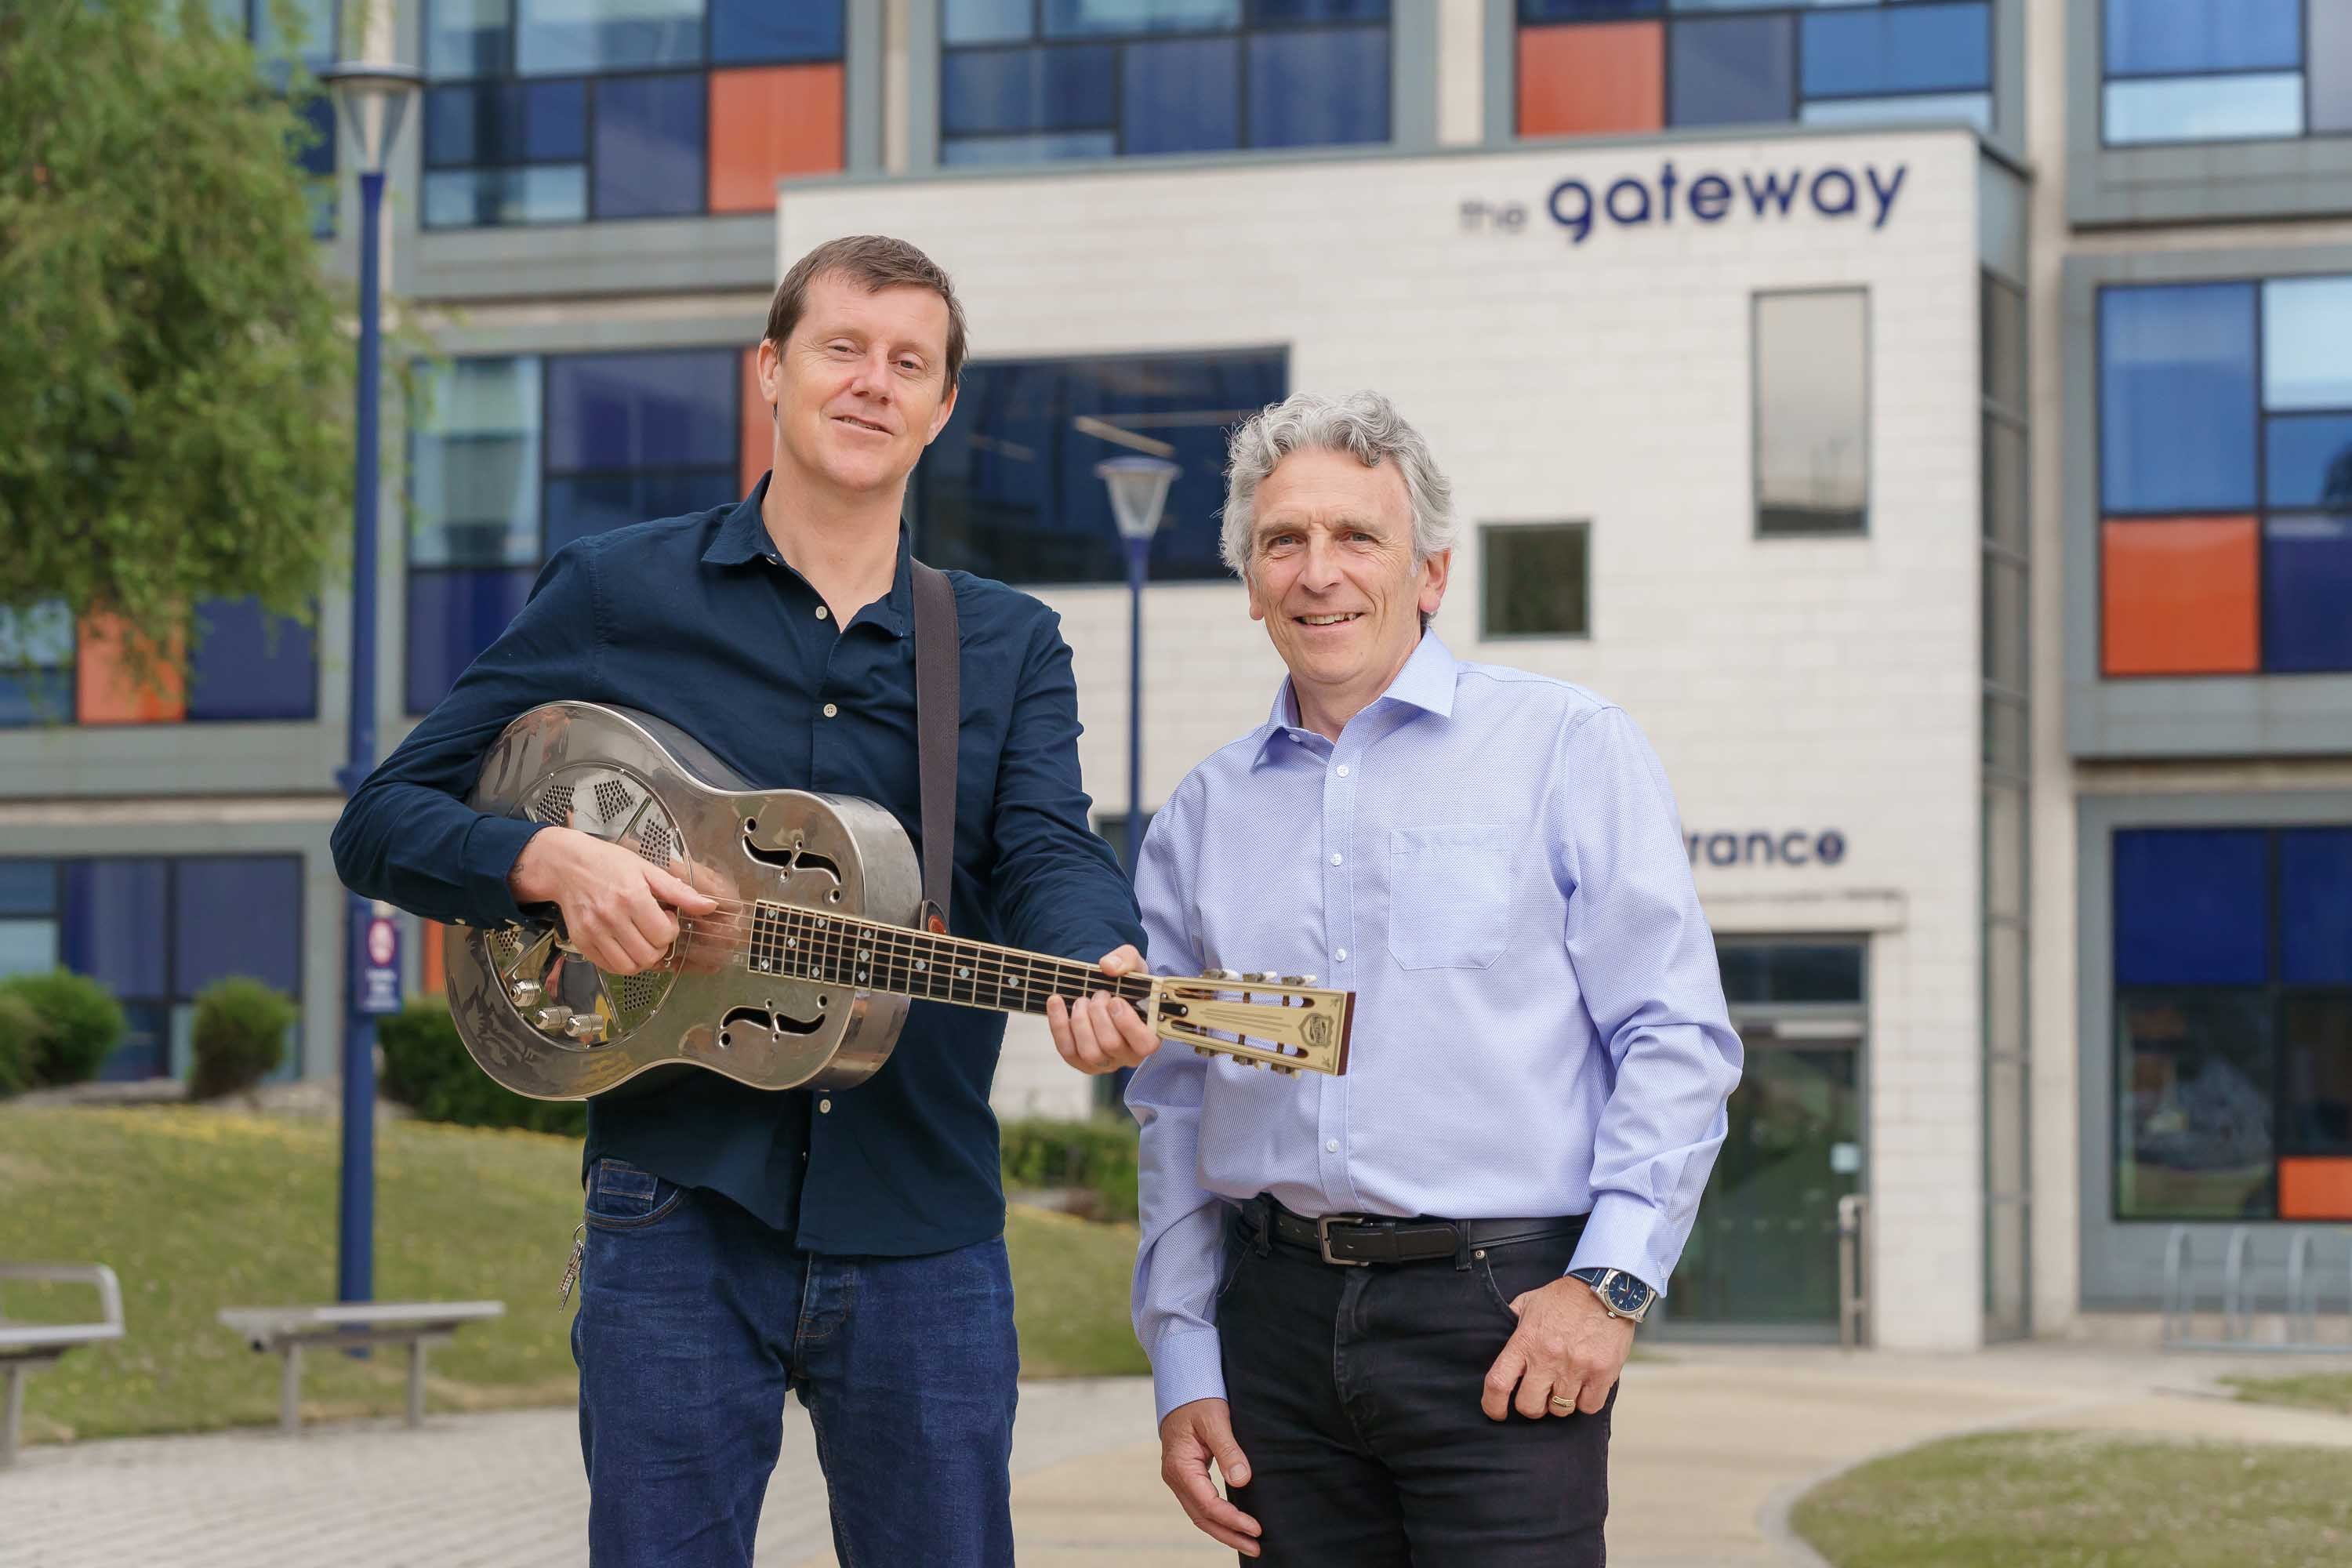 Richard O'Neill and George Hoyle stand outside of The Gateway building holding a guitar.